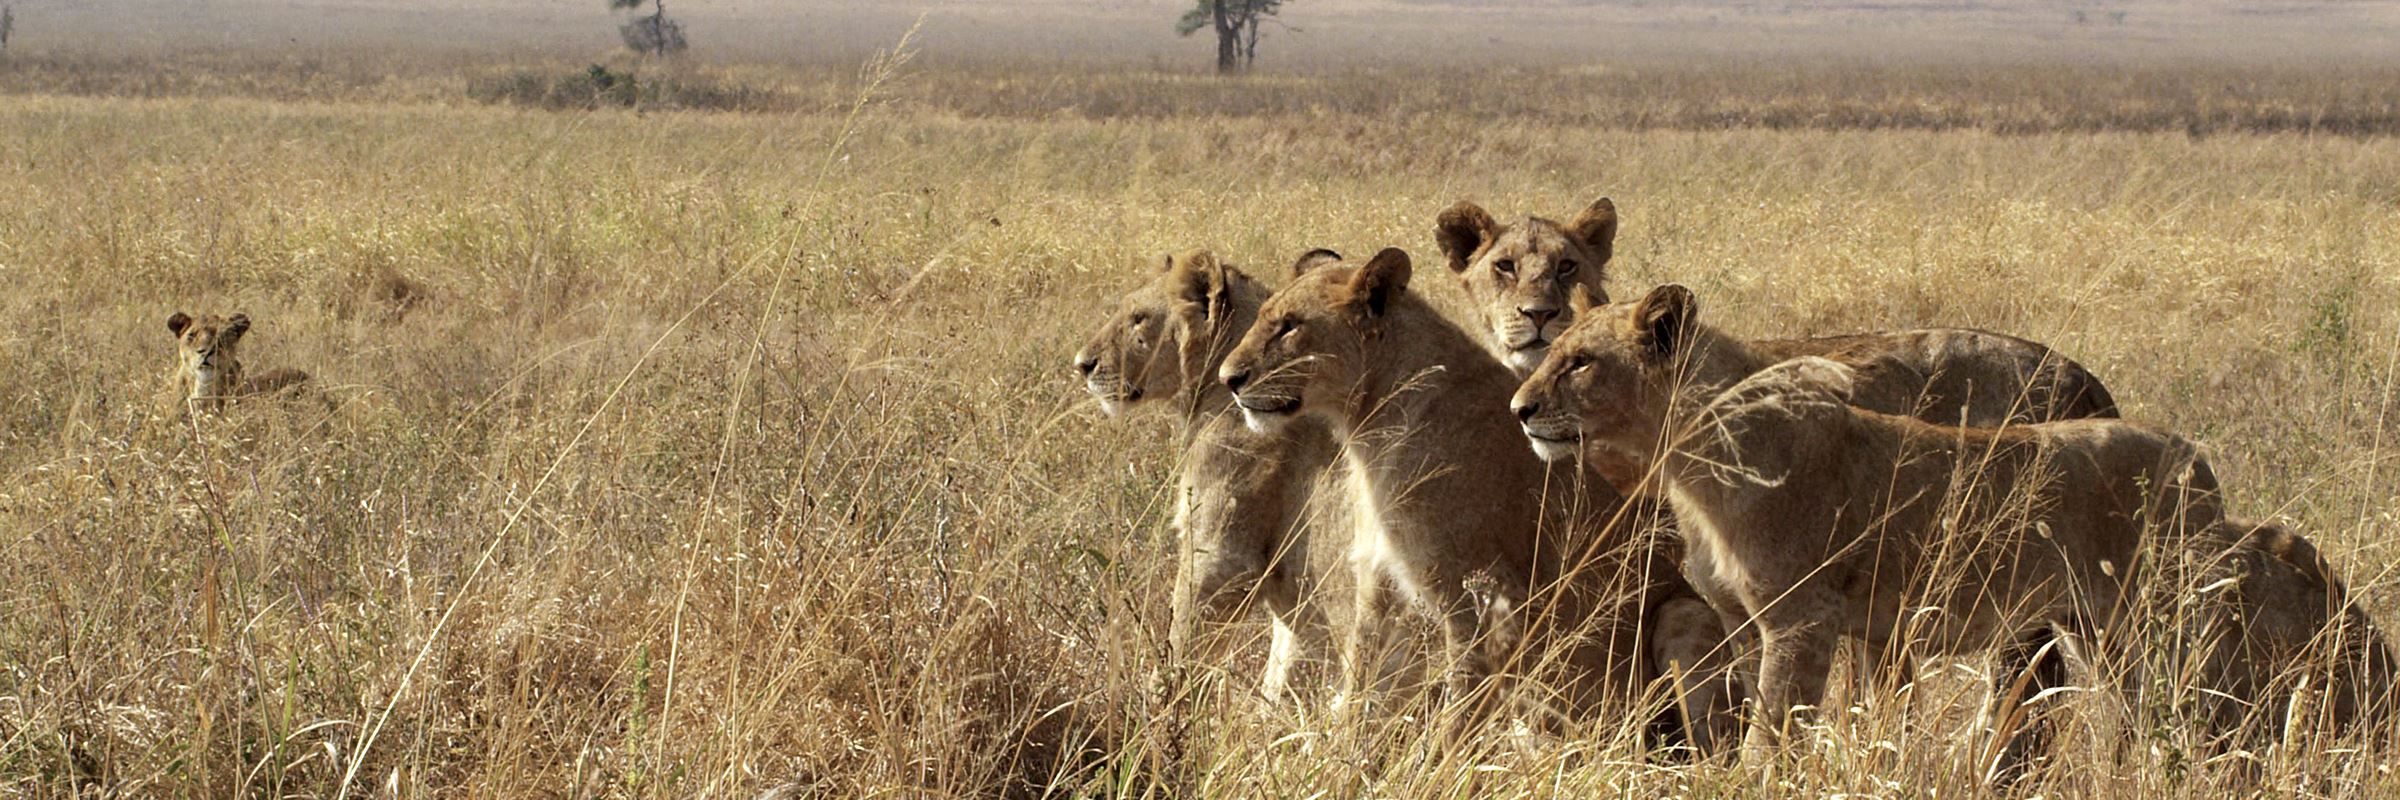 The Big Five in Kenya | Audley Travel